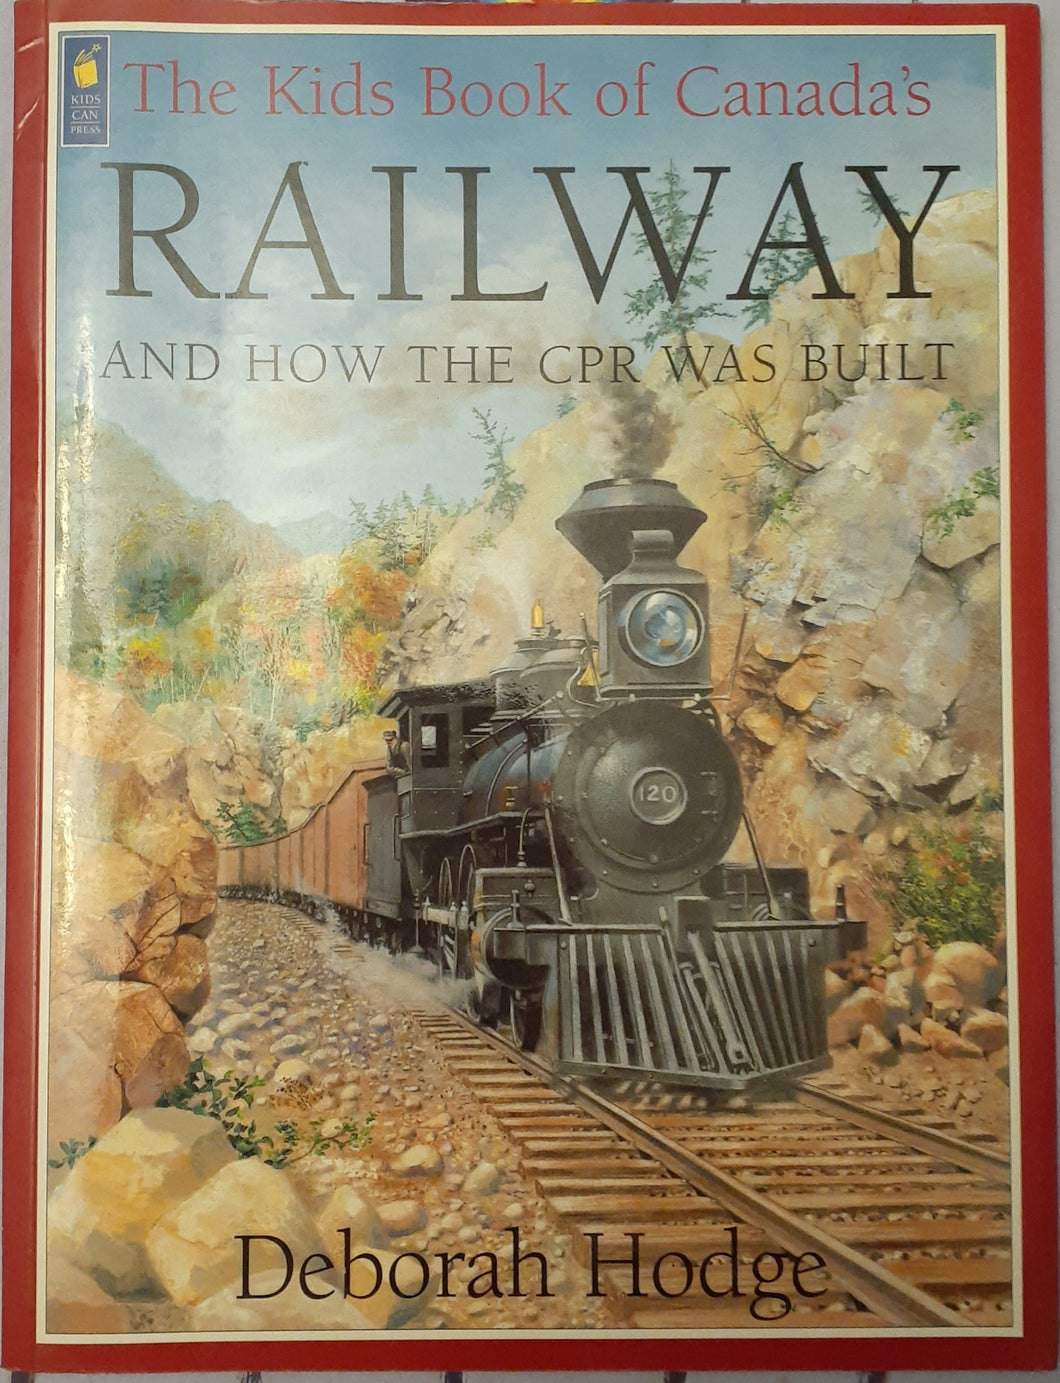 The Kids Book of Canada's - Railway